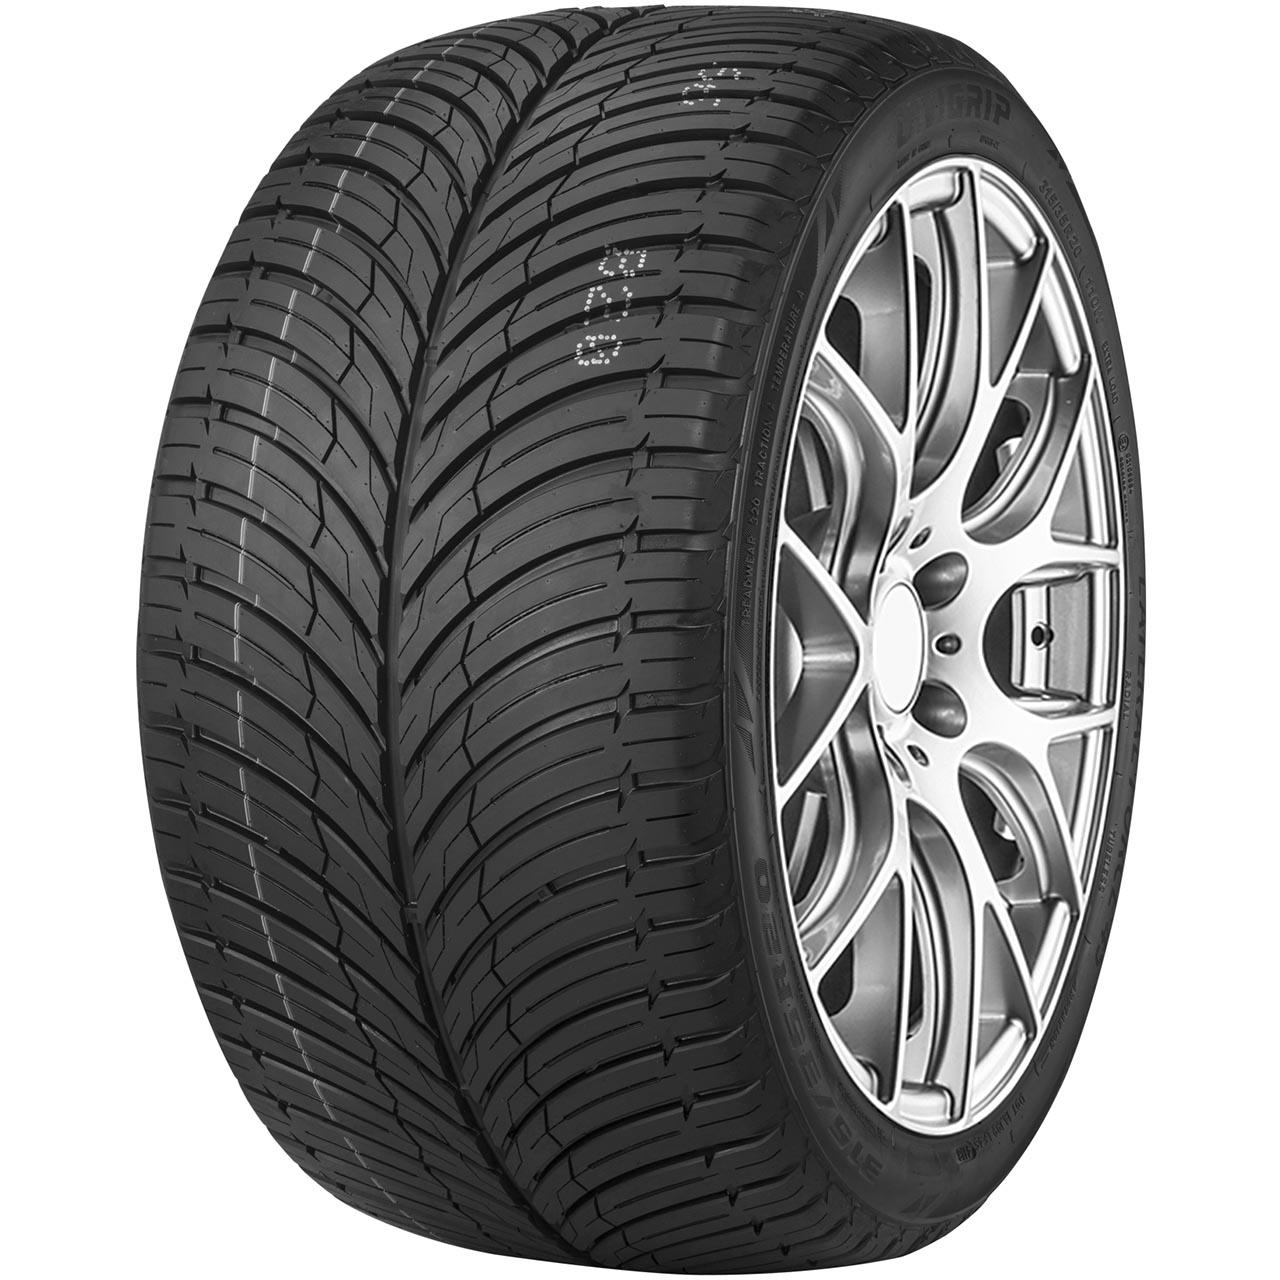 Unigrip Lateral Force 4S 225/50R18 99W XL